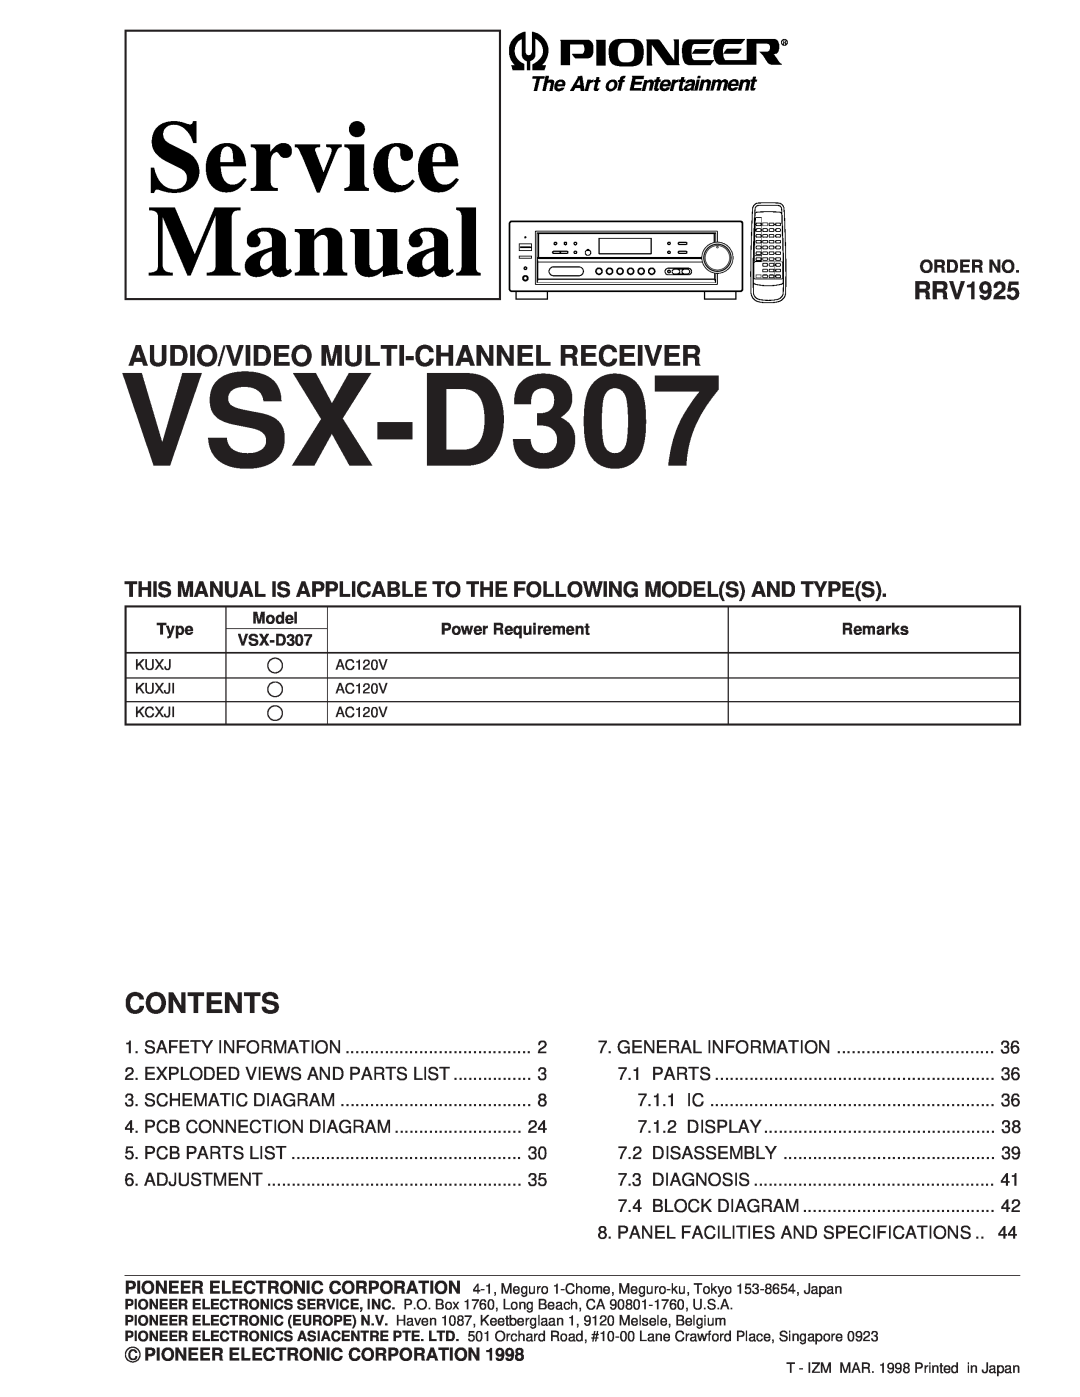 Dolby Laboratories 31-3043, STAV-3770 service manual Audio/Video Multi-Channelreceiver, Contents, RRV1925, VSX-D307 